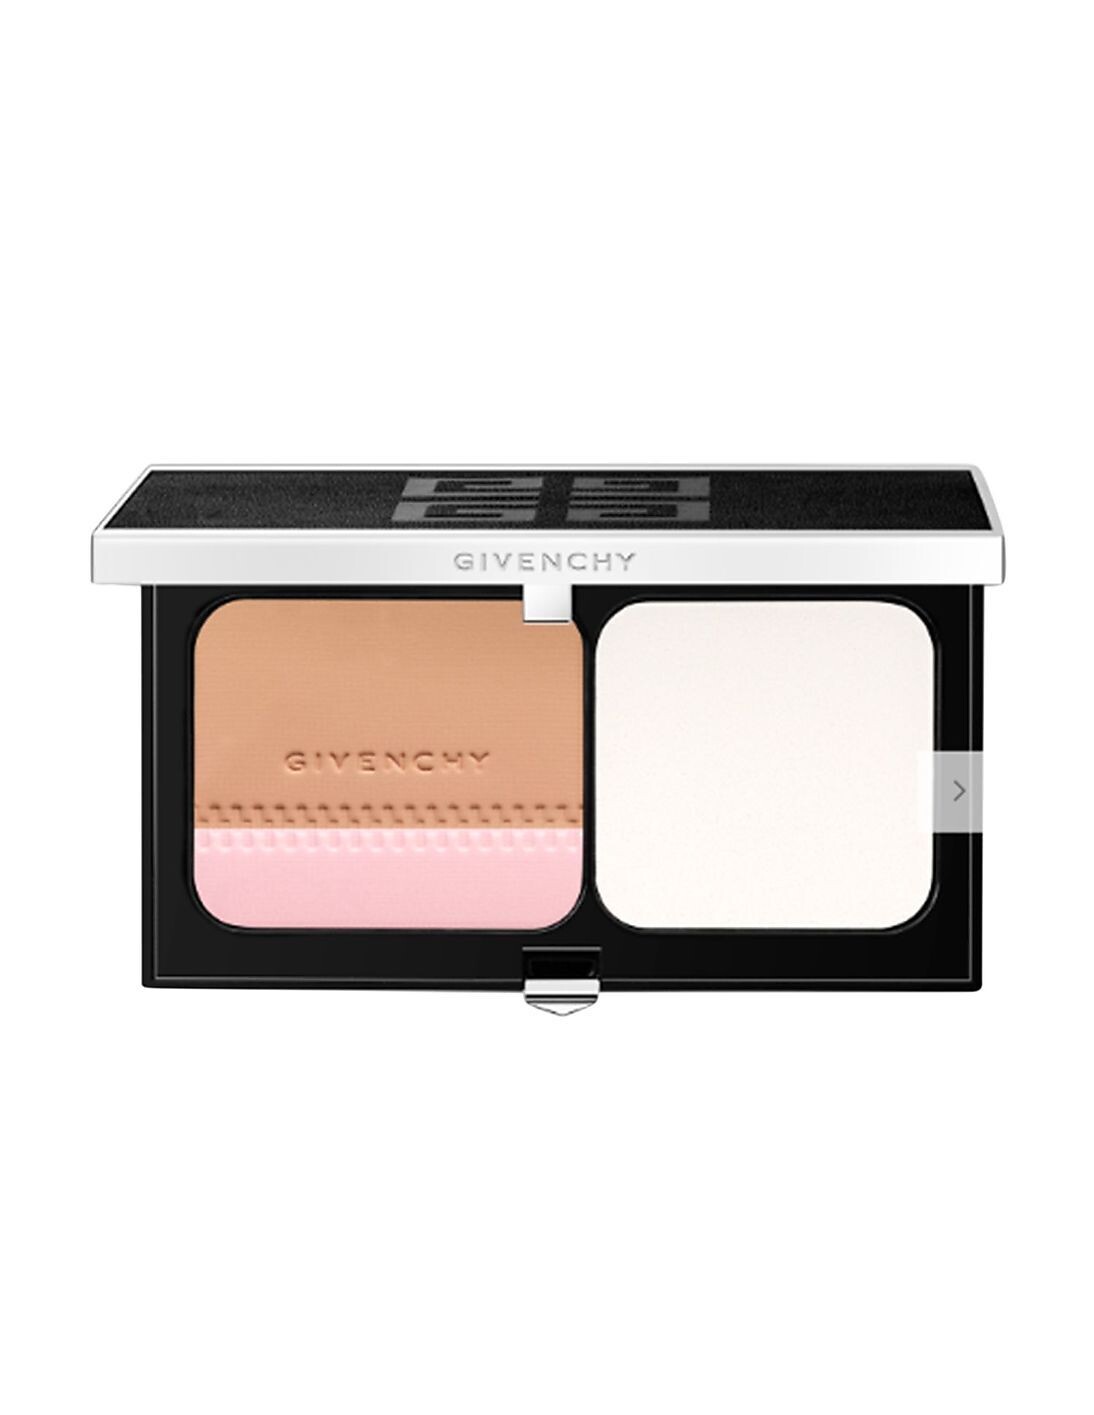 GIVENCHY TEINT COUTURE ILLUMINATING & COMFORTABLE NO 06